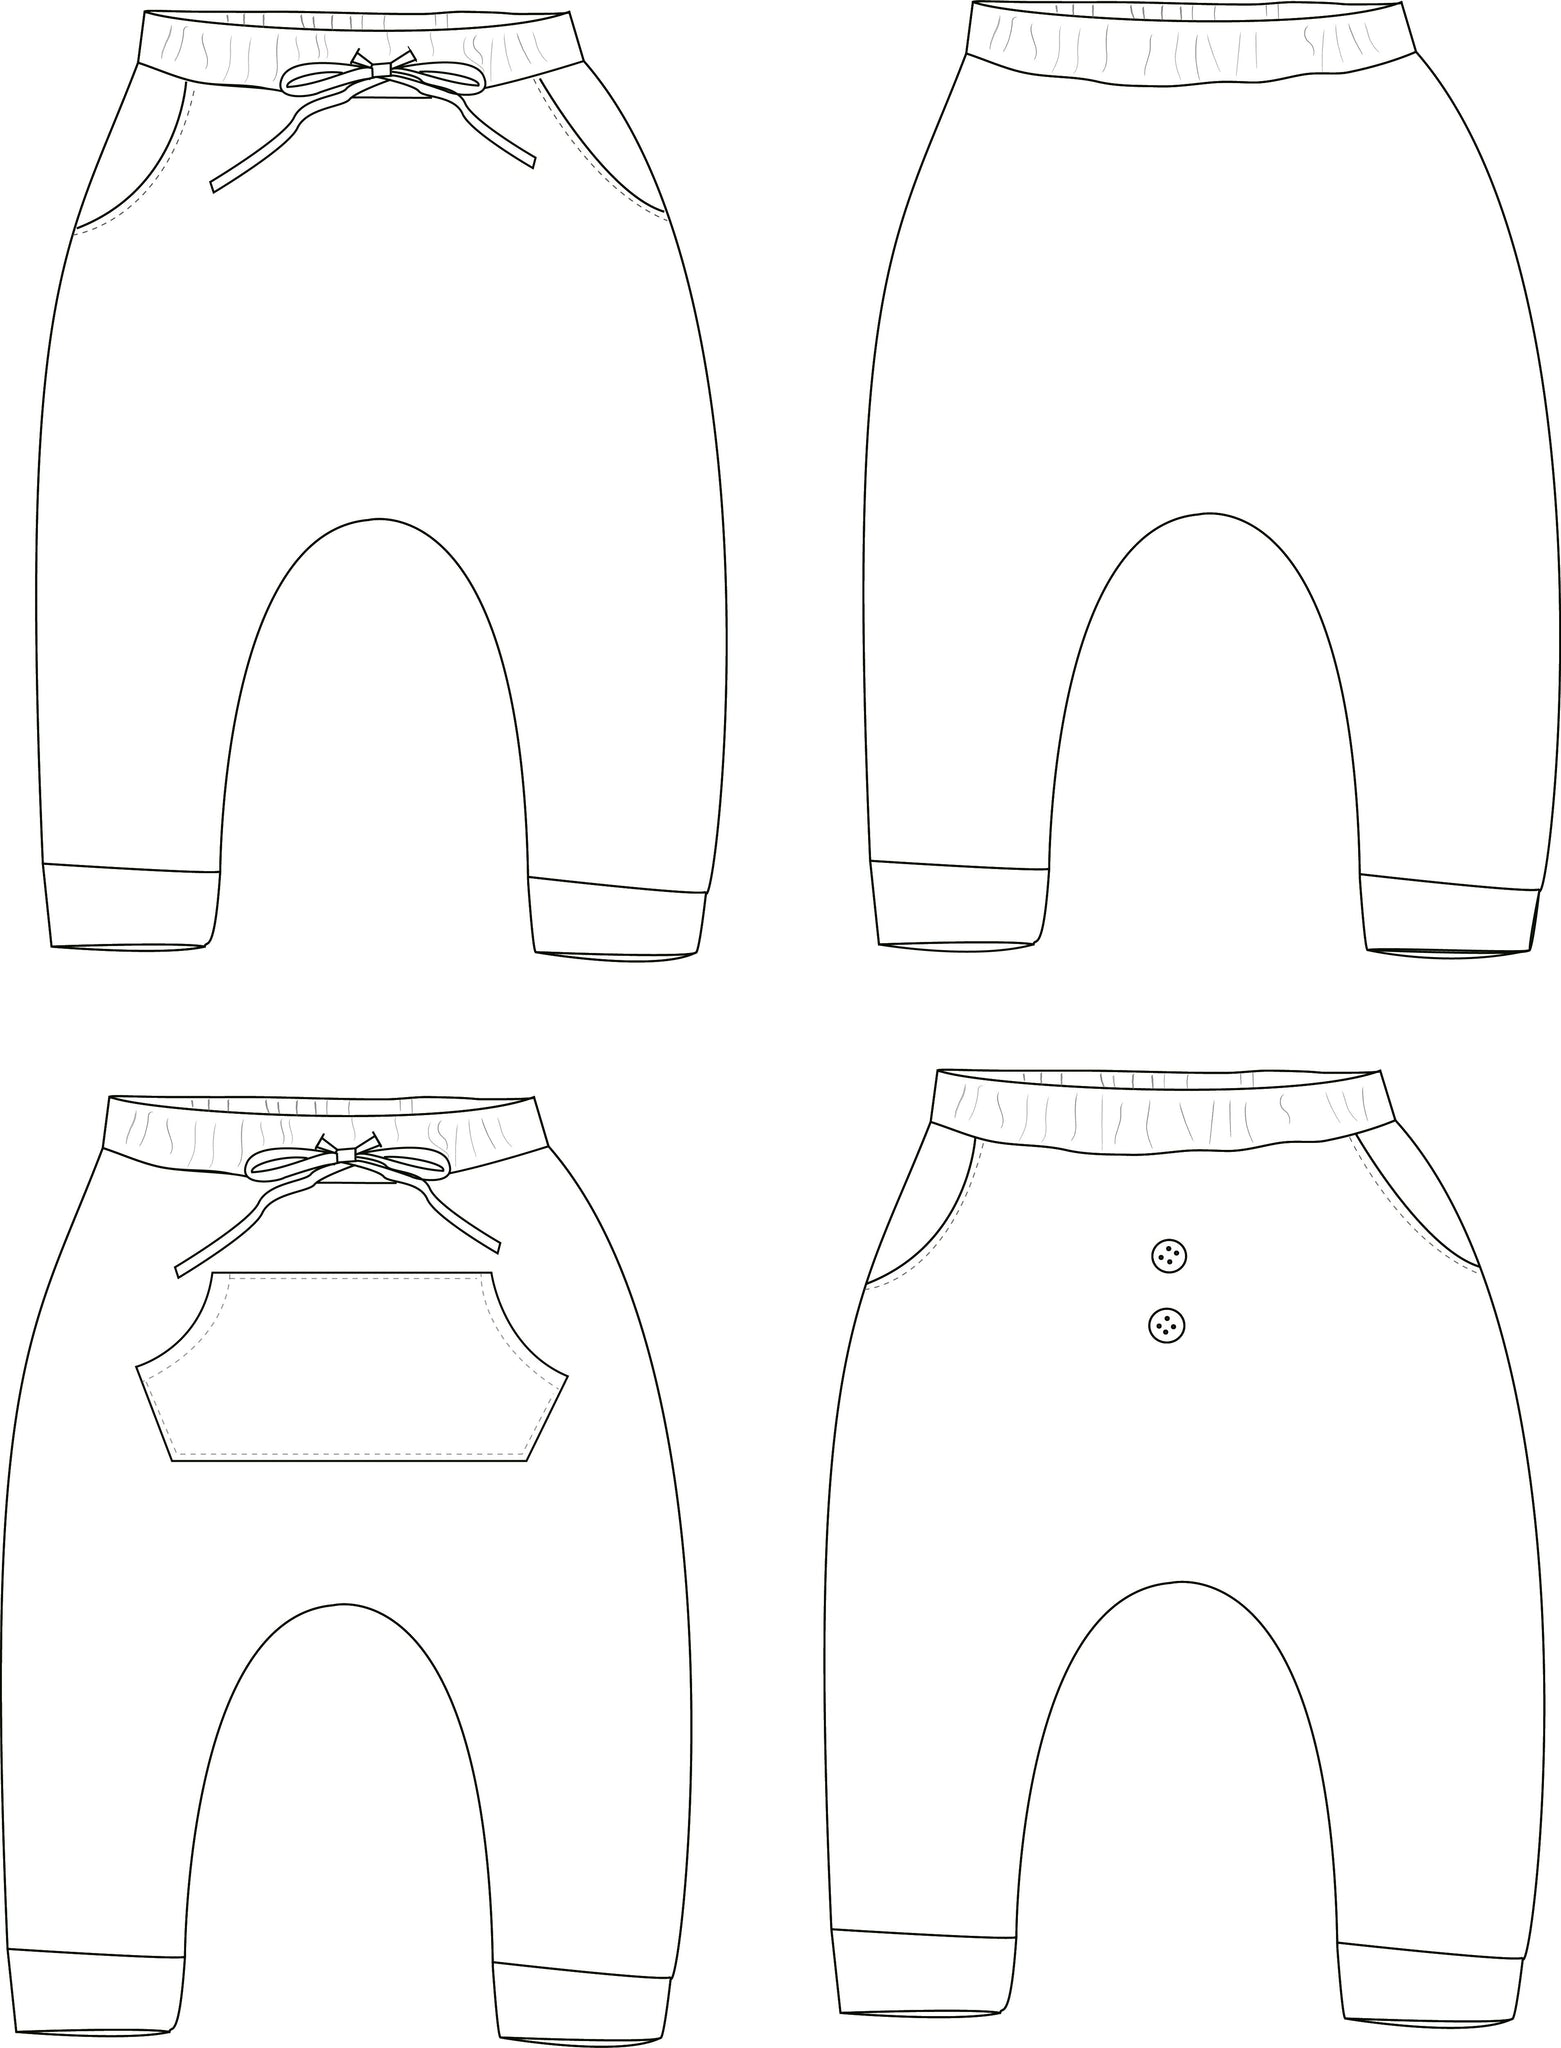 Baby harem pants sewing pattern PDF, those are cute and comfy baggy pants